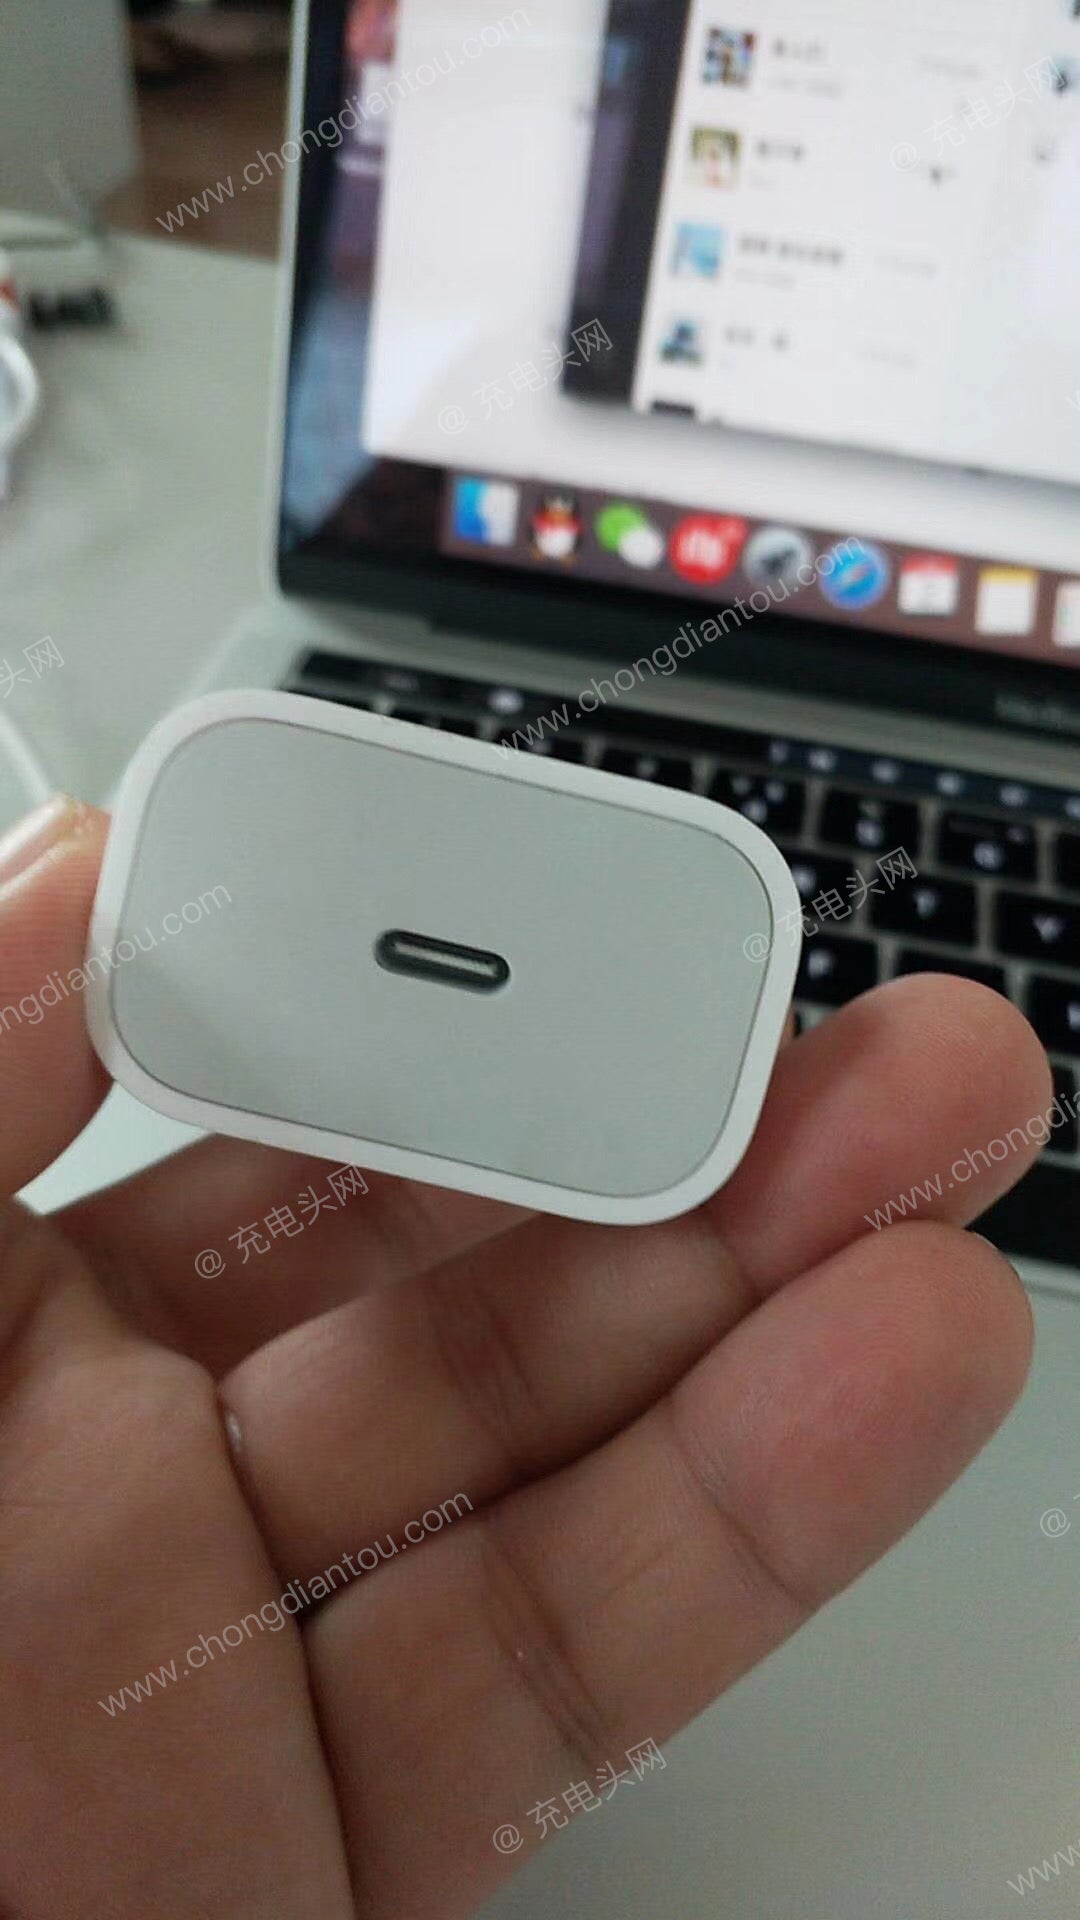 Leaked USB-PD adapter for 2018 iPhones - Apple's leaked USB-C fast charger may stay exclusive to the new 2018 iPhones' boxes